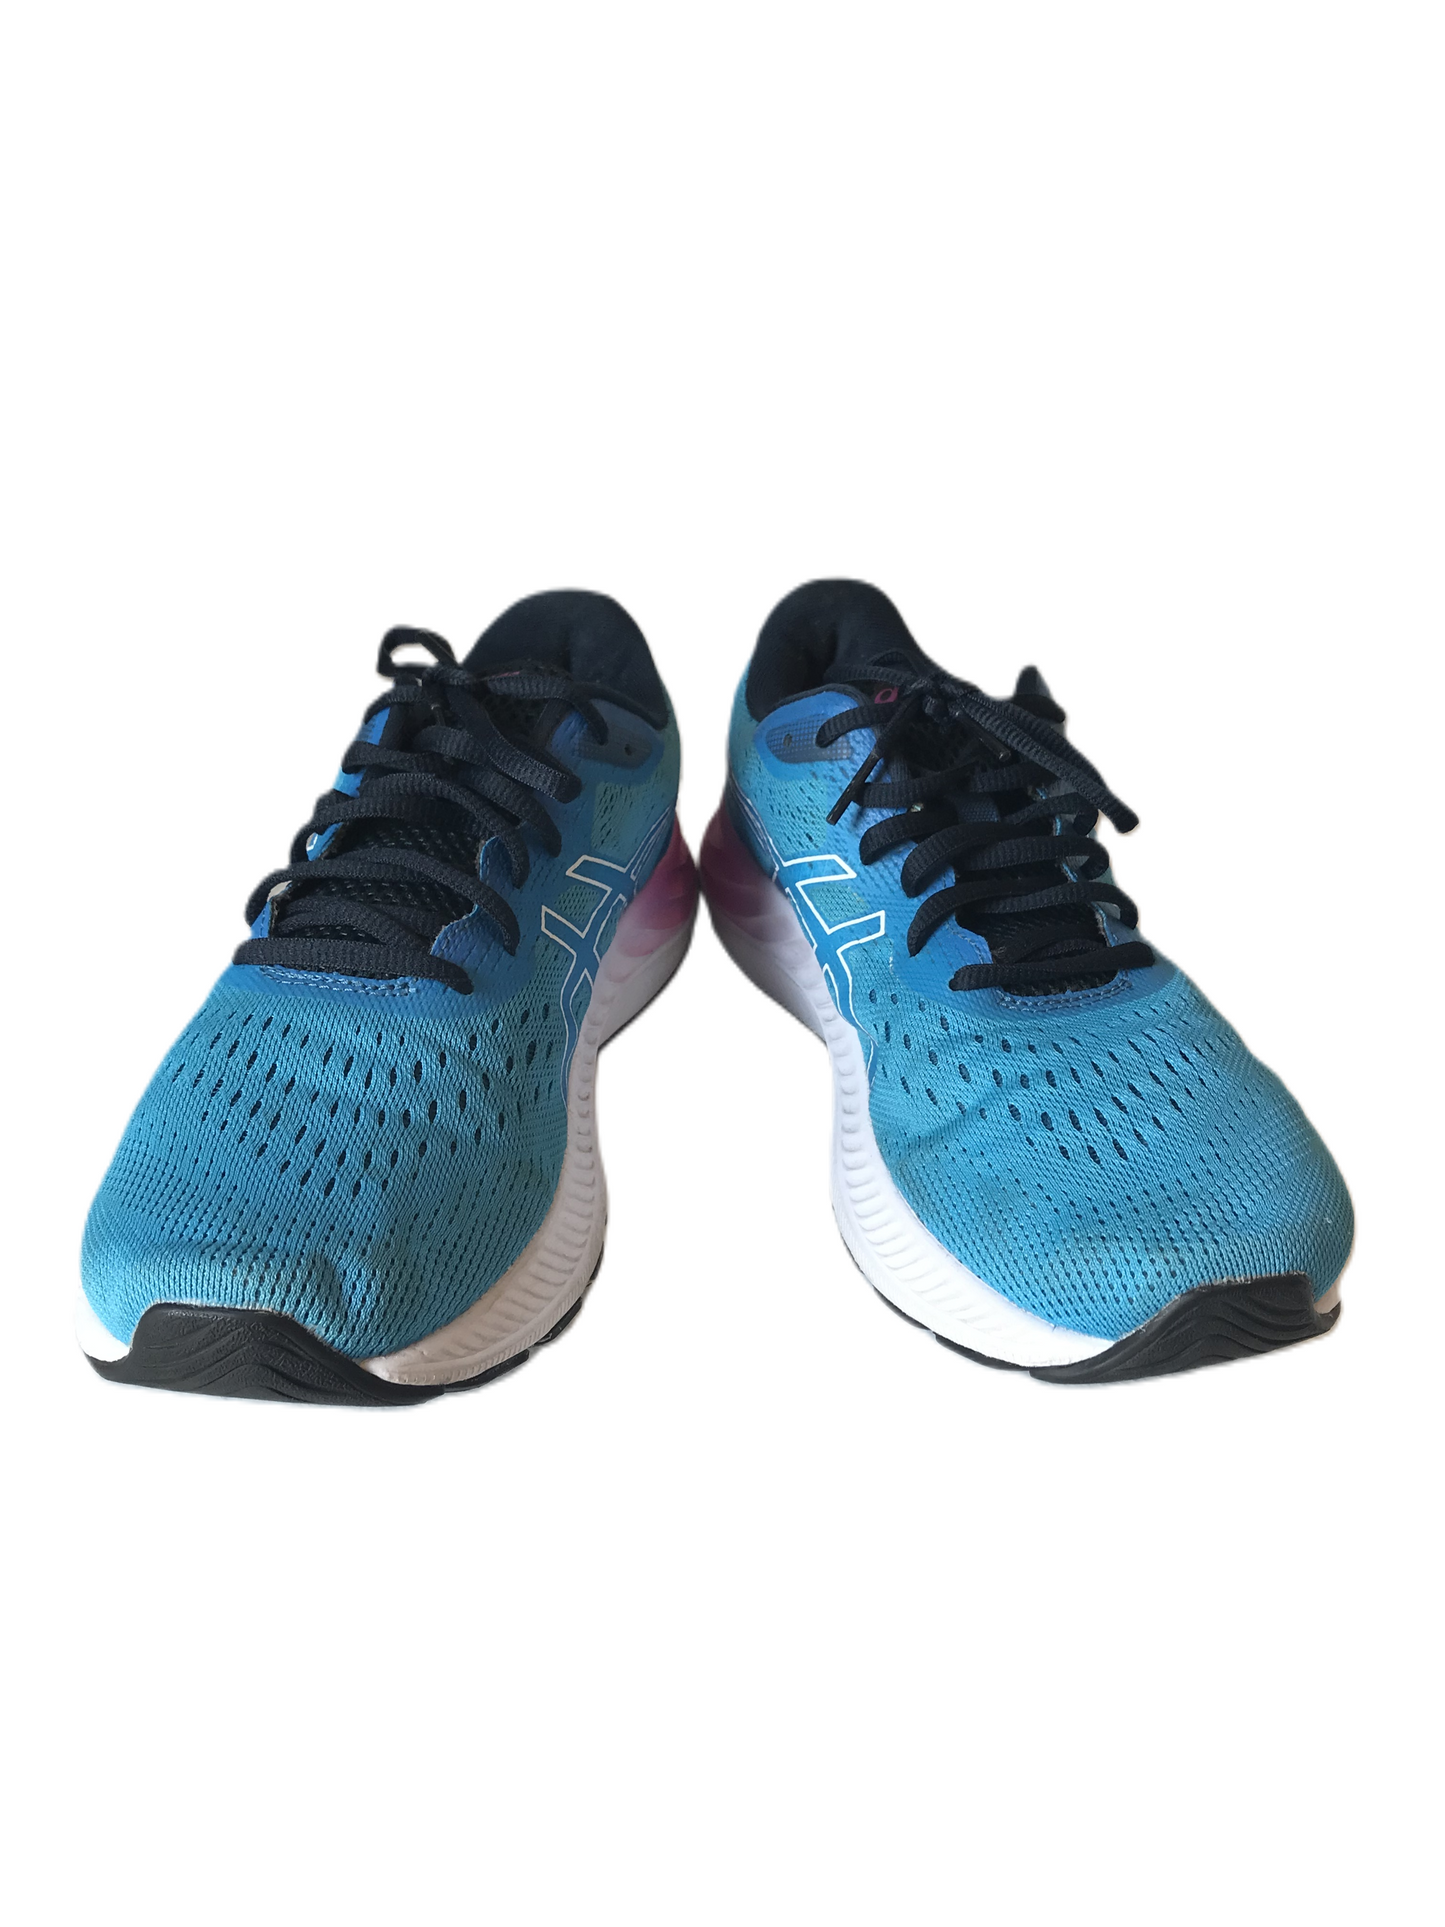 Blue Shoes Athletic By Asics, Size: 9.5